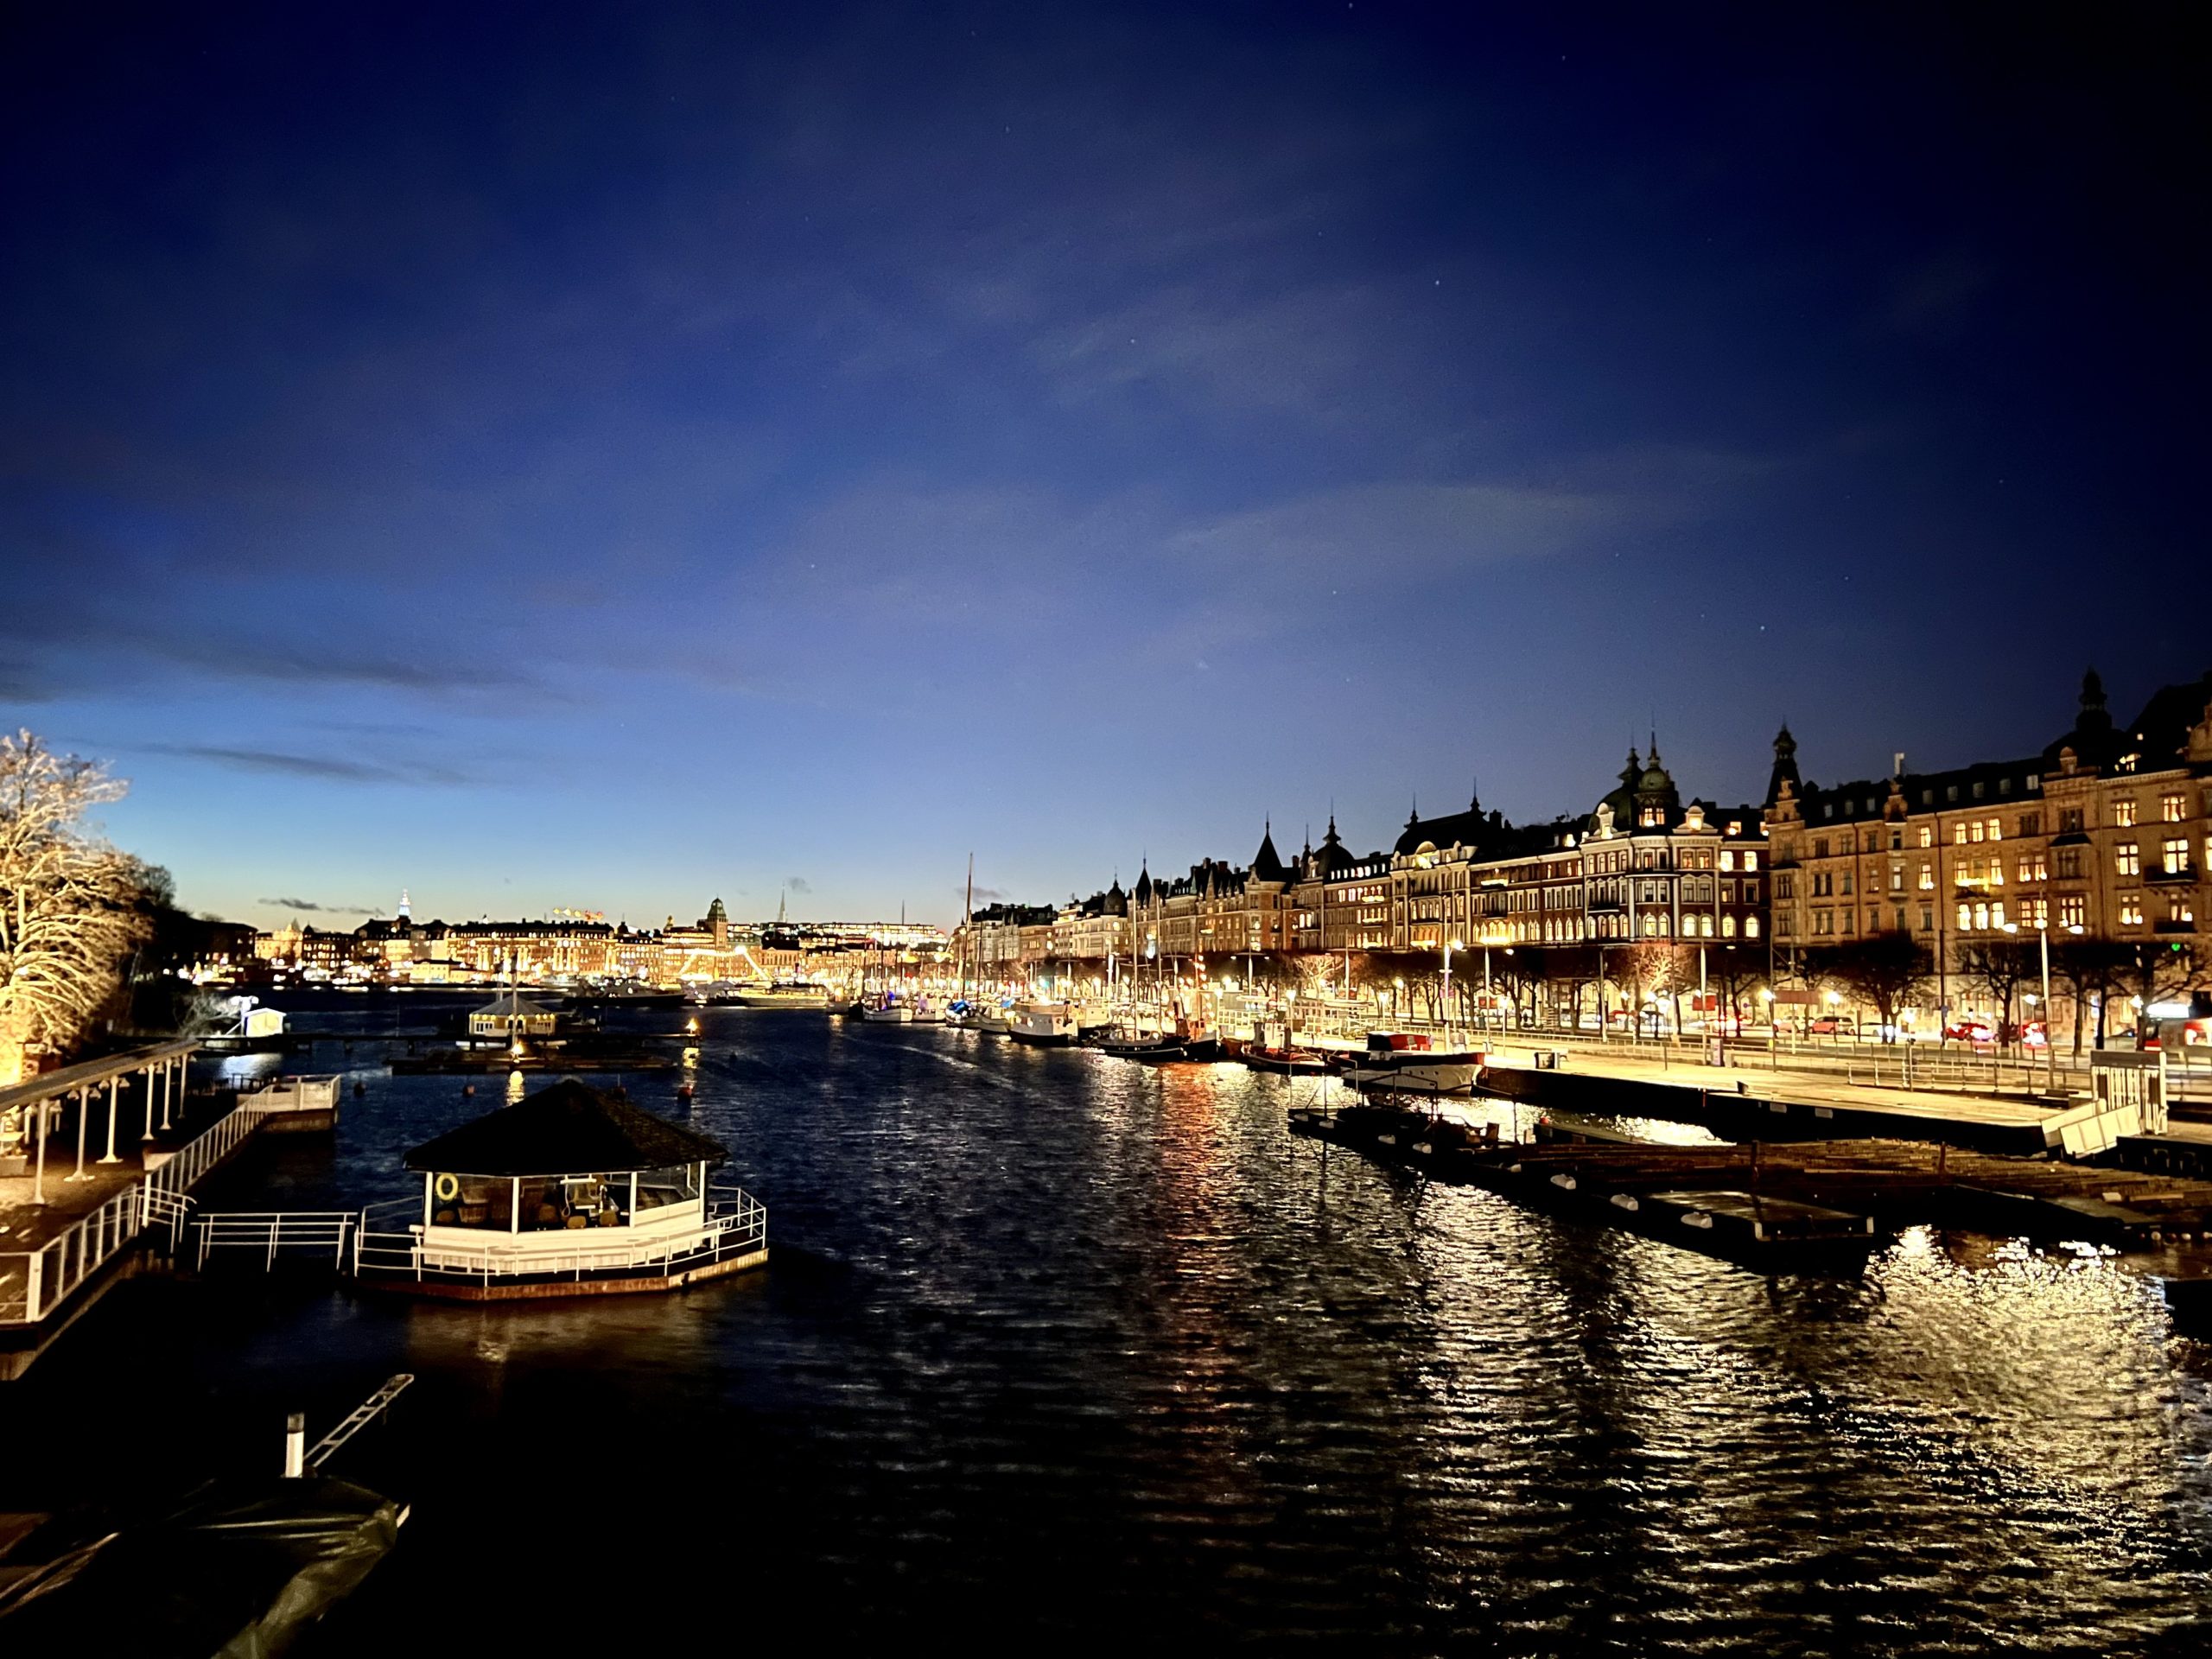 Immerse yourself in the beauty of Sweden with this captivating image. Discover stunning landscapes, vibrant cities, and rich cultural heritage. Experience the charm of Stockholm, explore picturesque countryside, and indulge in Swedish traditions. Explore Sweden's diverse attractions through this captivating image.